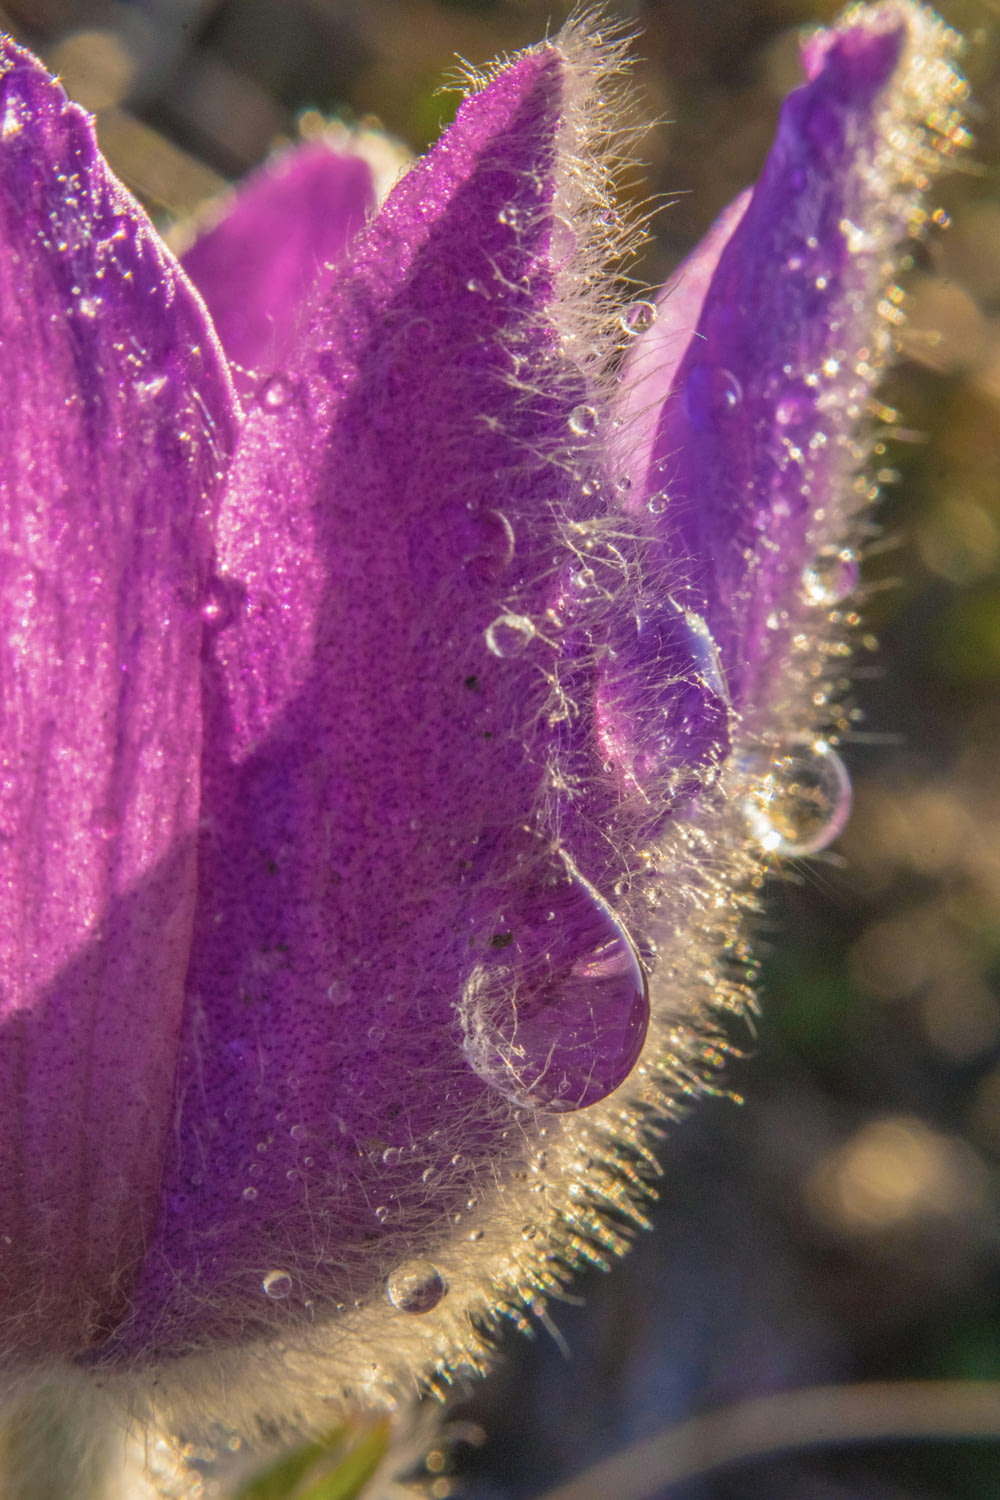 a close up of a purple flower with drops of water on it